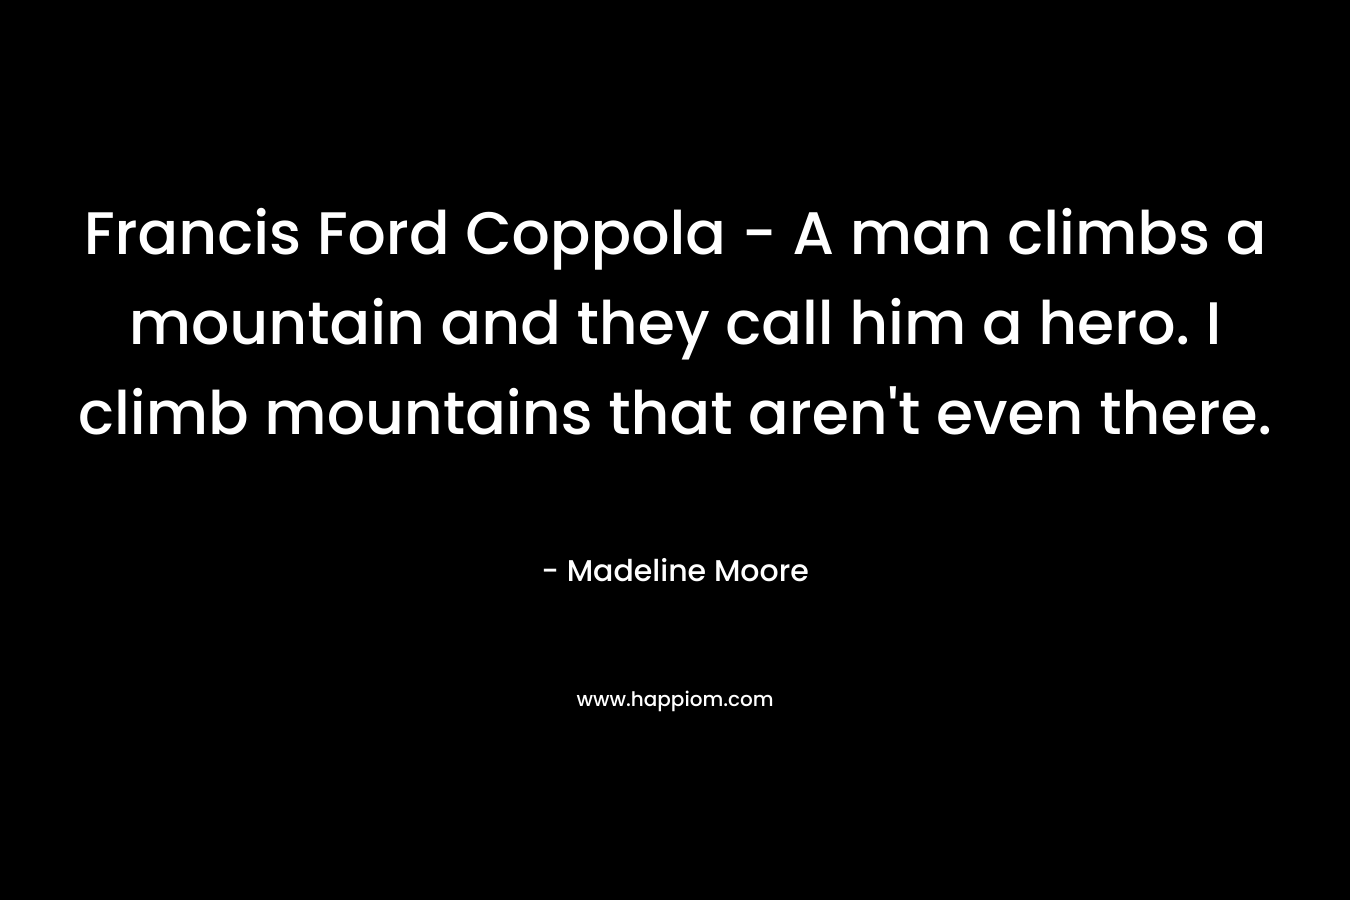 Francis Ford Coppola - A man climbs a mountain and they call him a hero. I climb mountains that aren't even there.